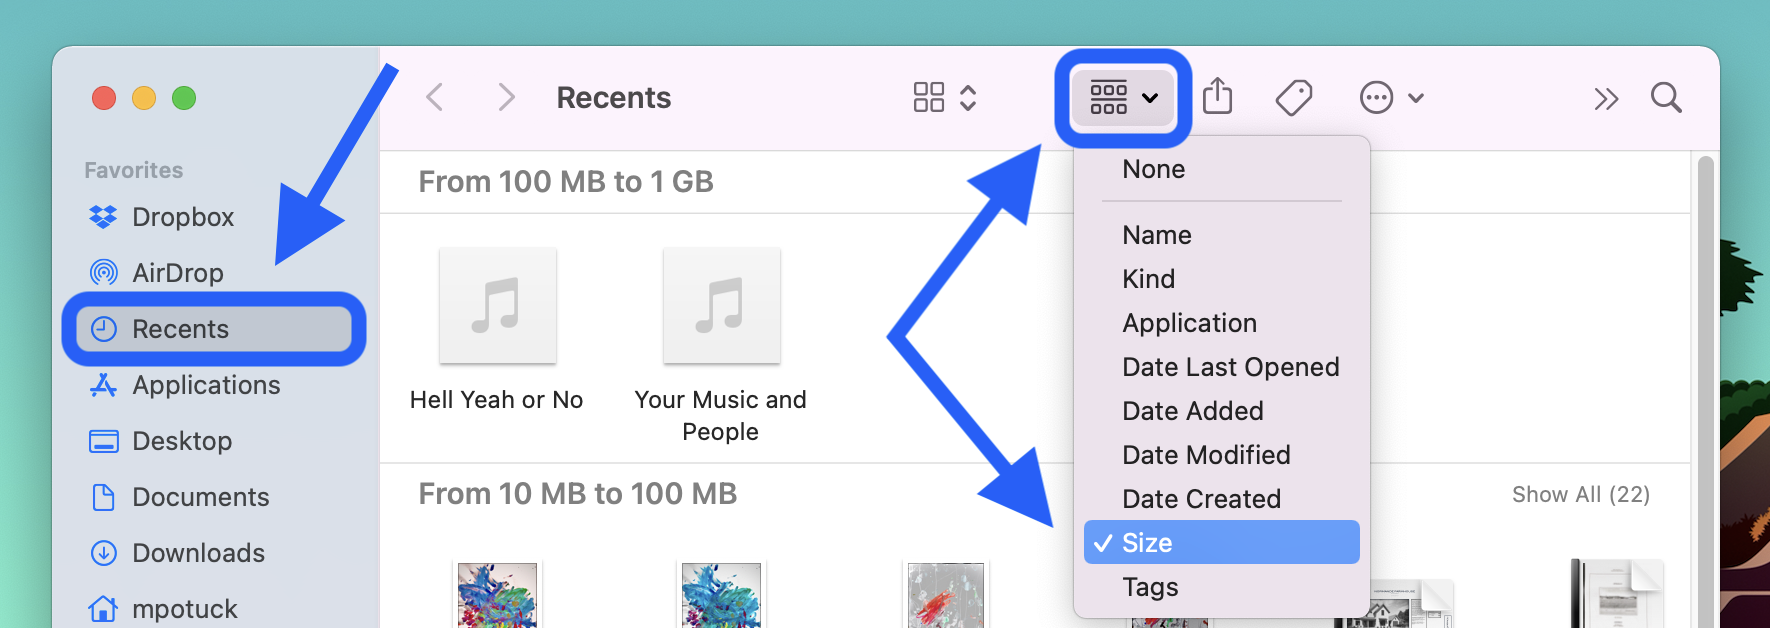 How to free up Mac storage space and hidden files Finder walkthrough 1